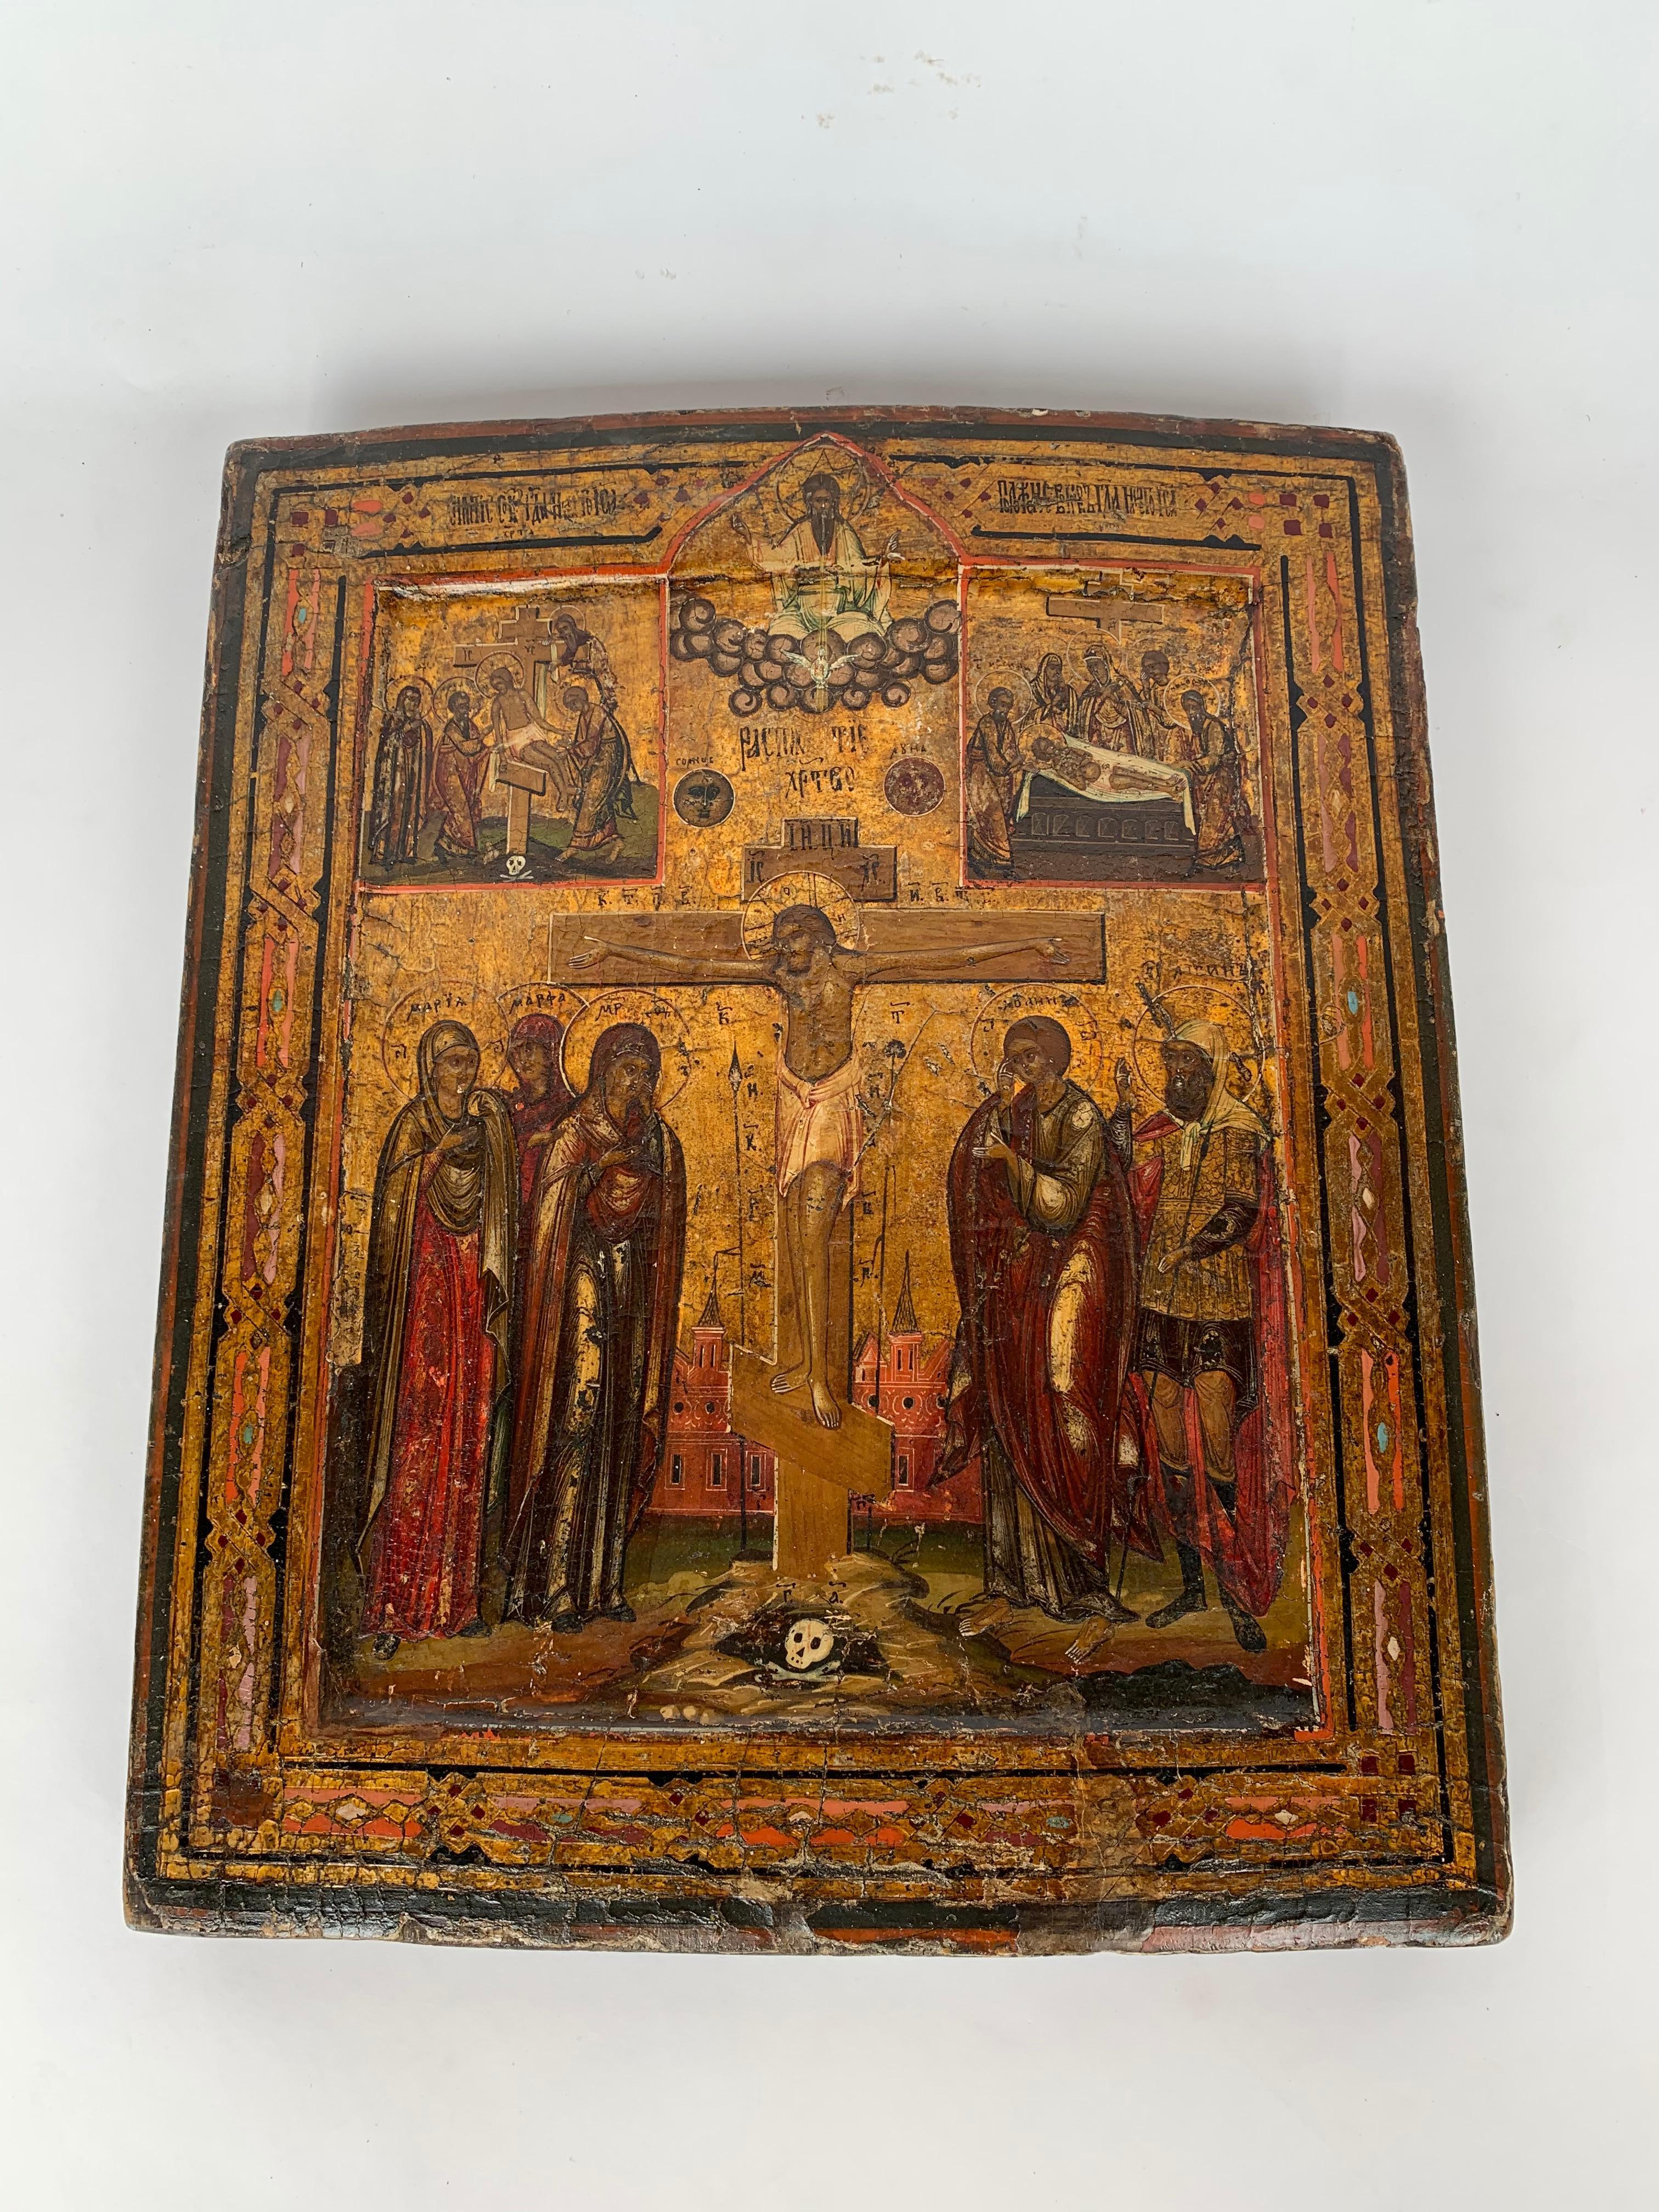 18th century Russian and parcel gilt icon depicting the crucifixion of Christ